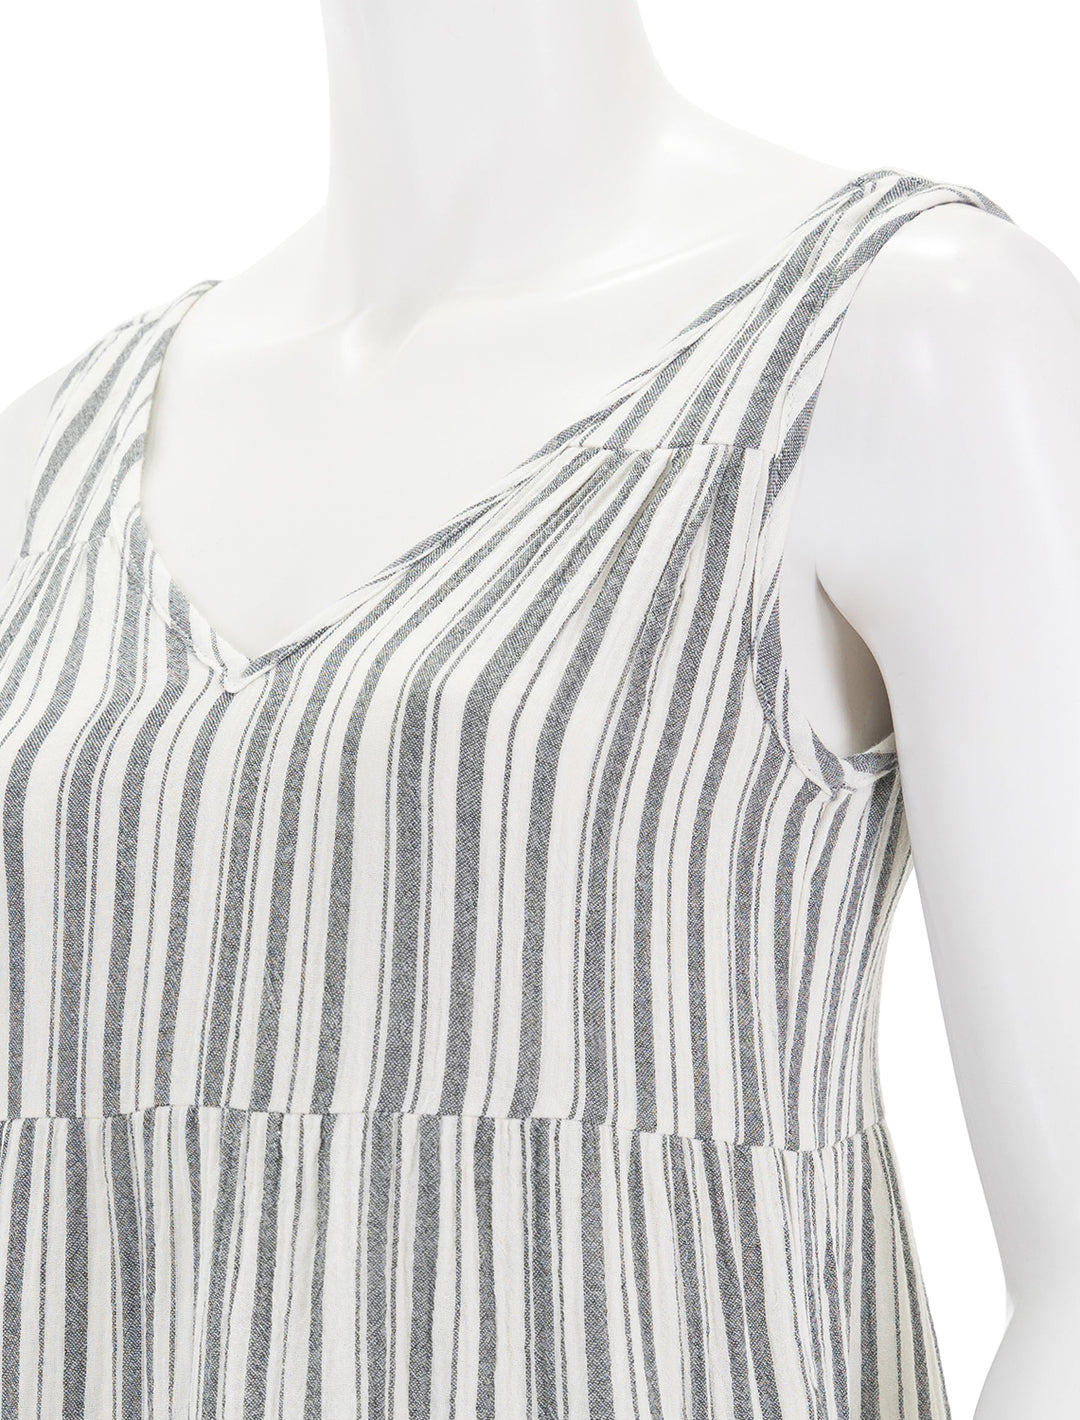 Close-up view of Marine Layer's corinne maxi dress in mixed black and white stripe.